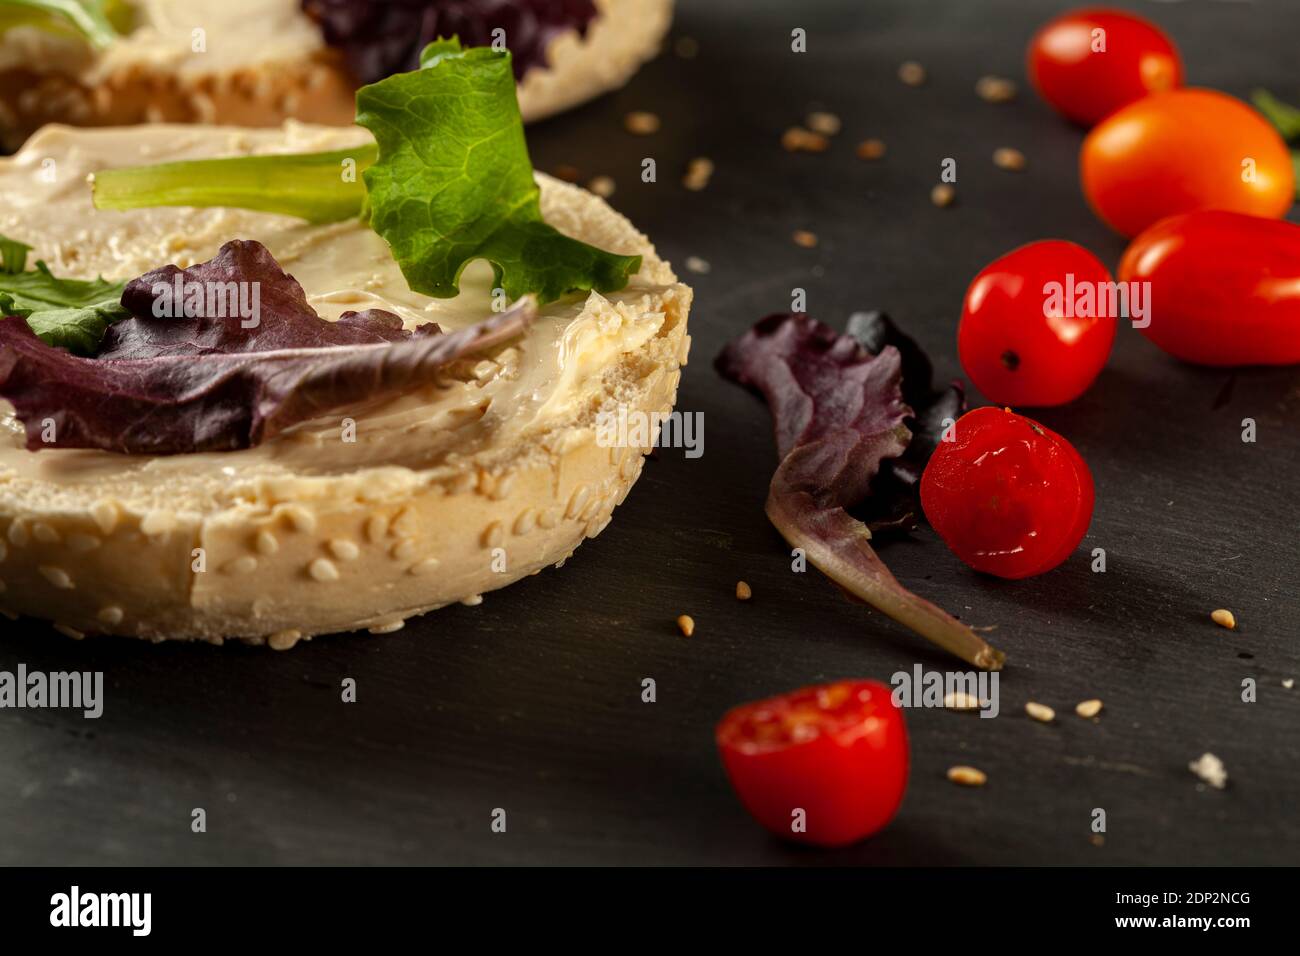 Toasted and sliced sesame bagel with creamy spread on it served with fresh greens (arugula) and cherry tomatoes on black wooden background. A healthy Stock Photo